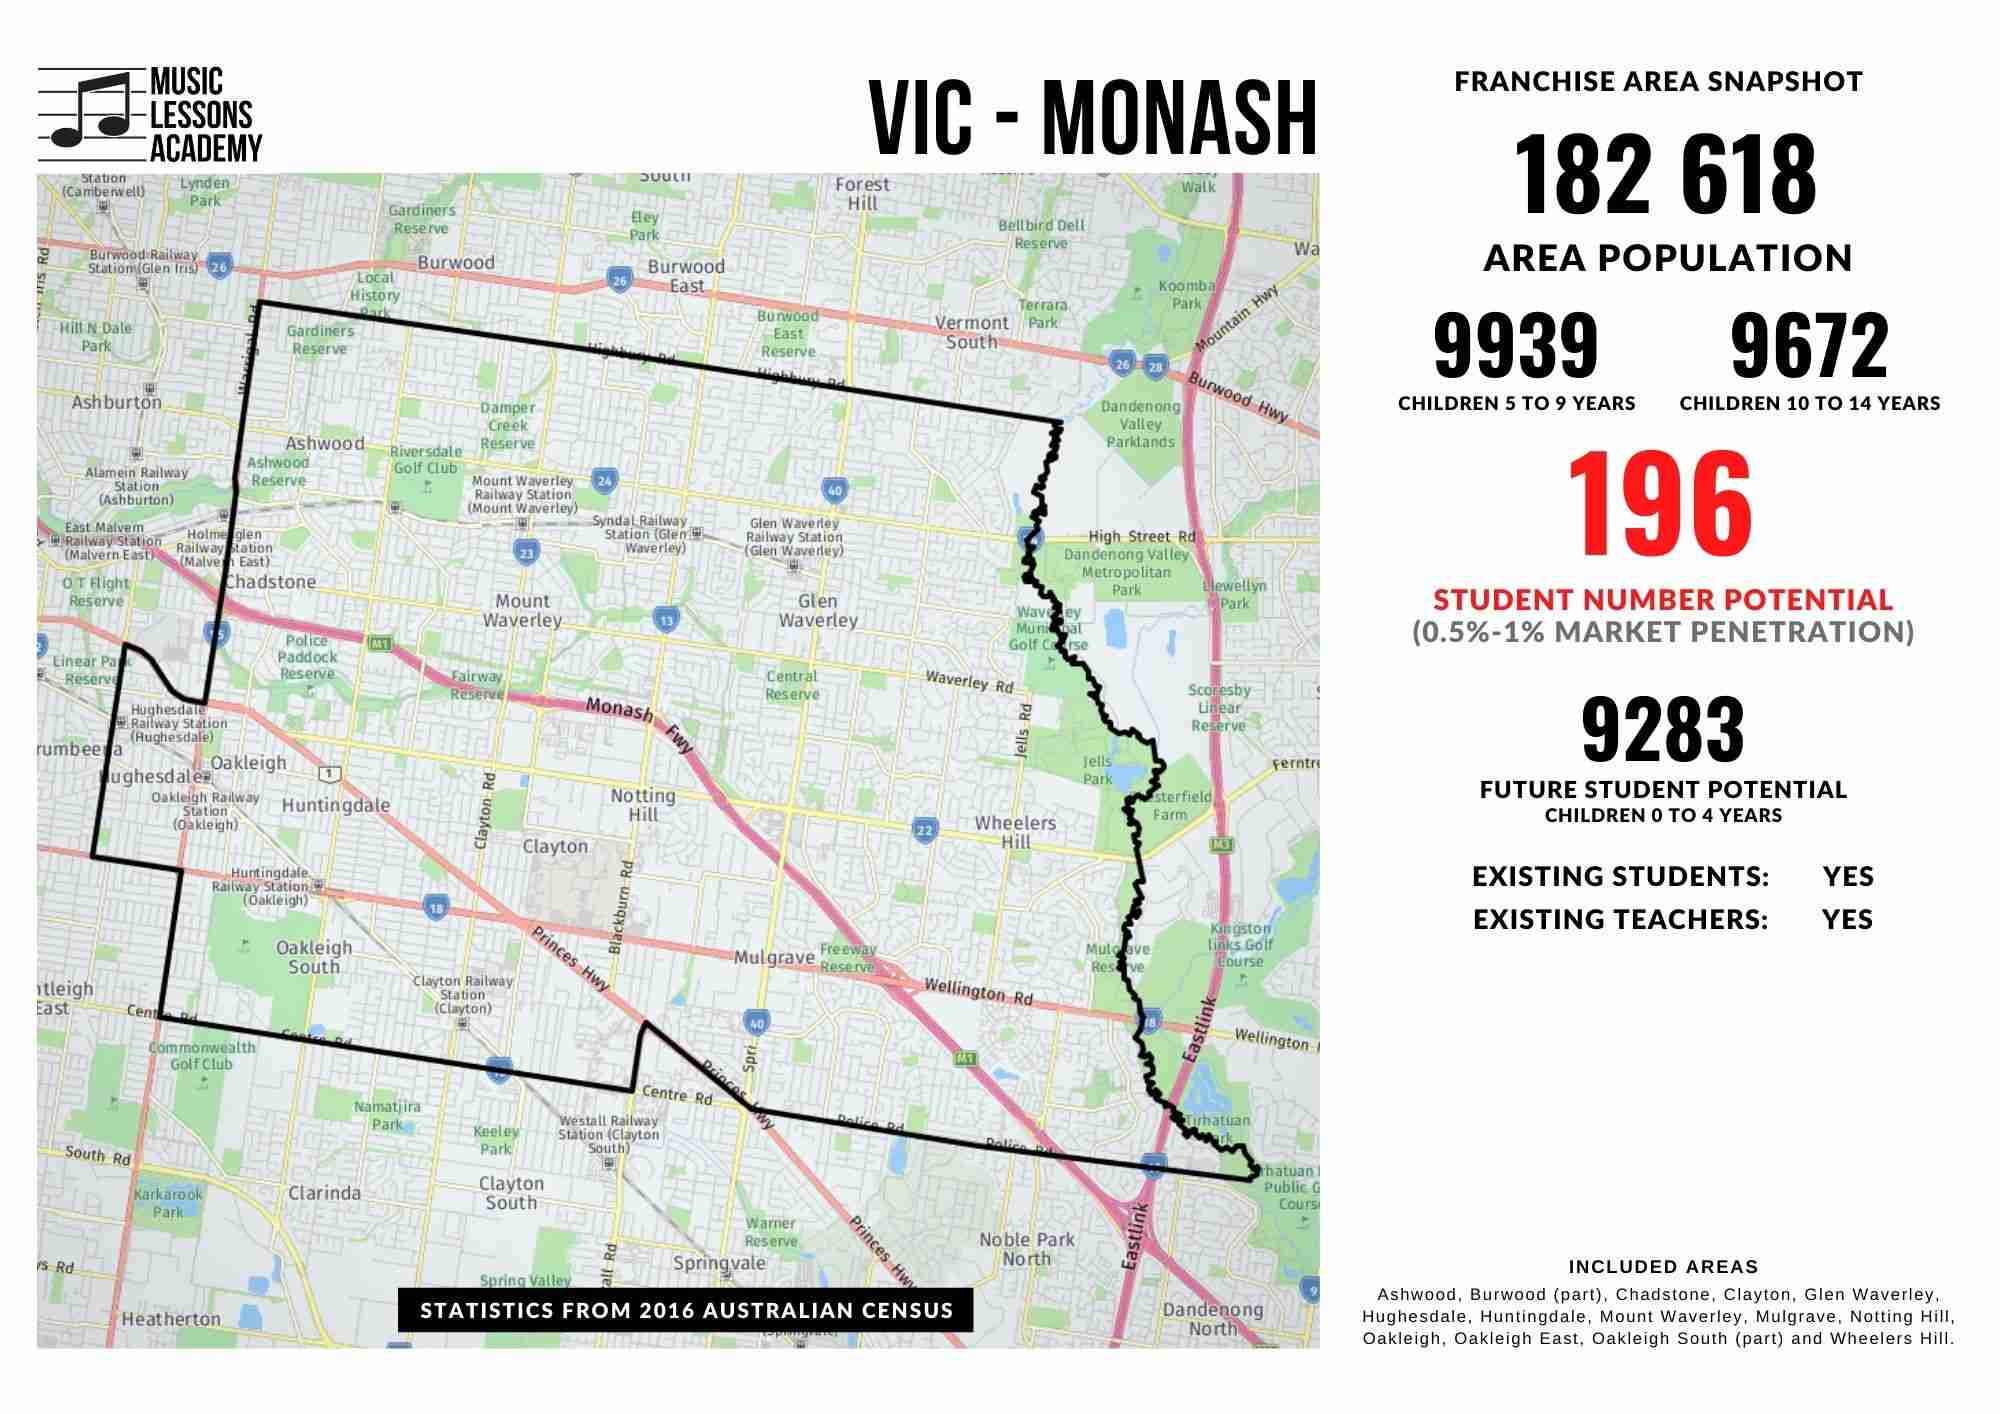 VIC Monash Oakleigh Franchise for sale